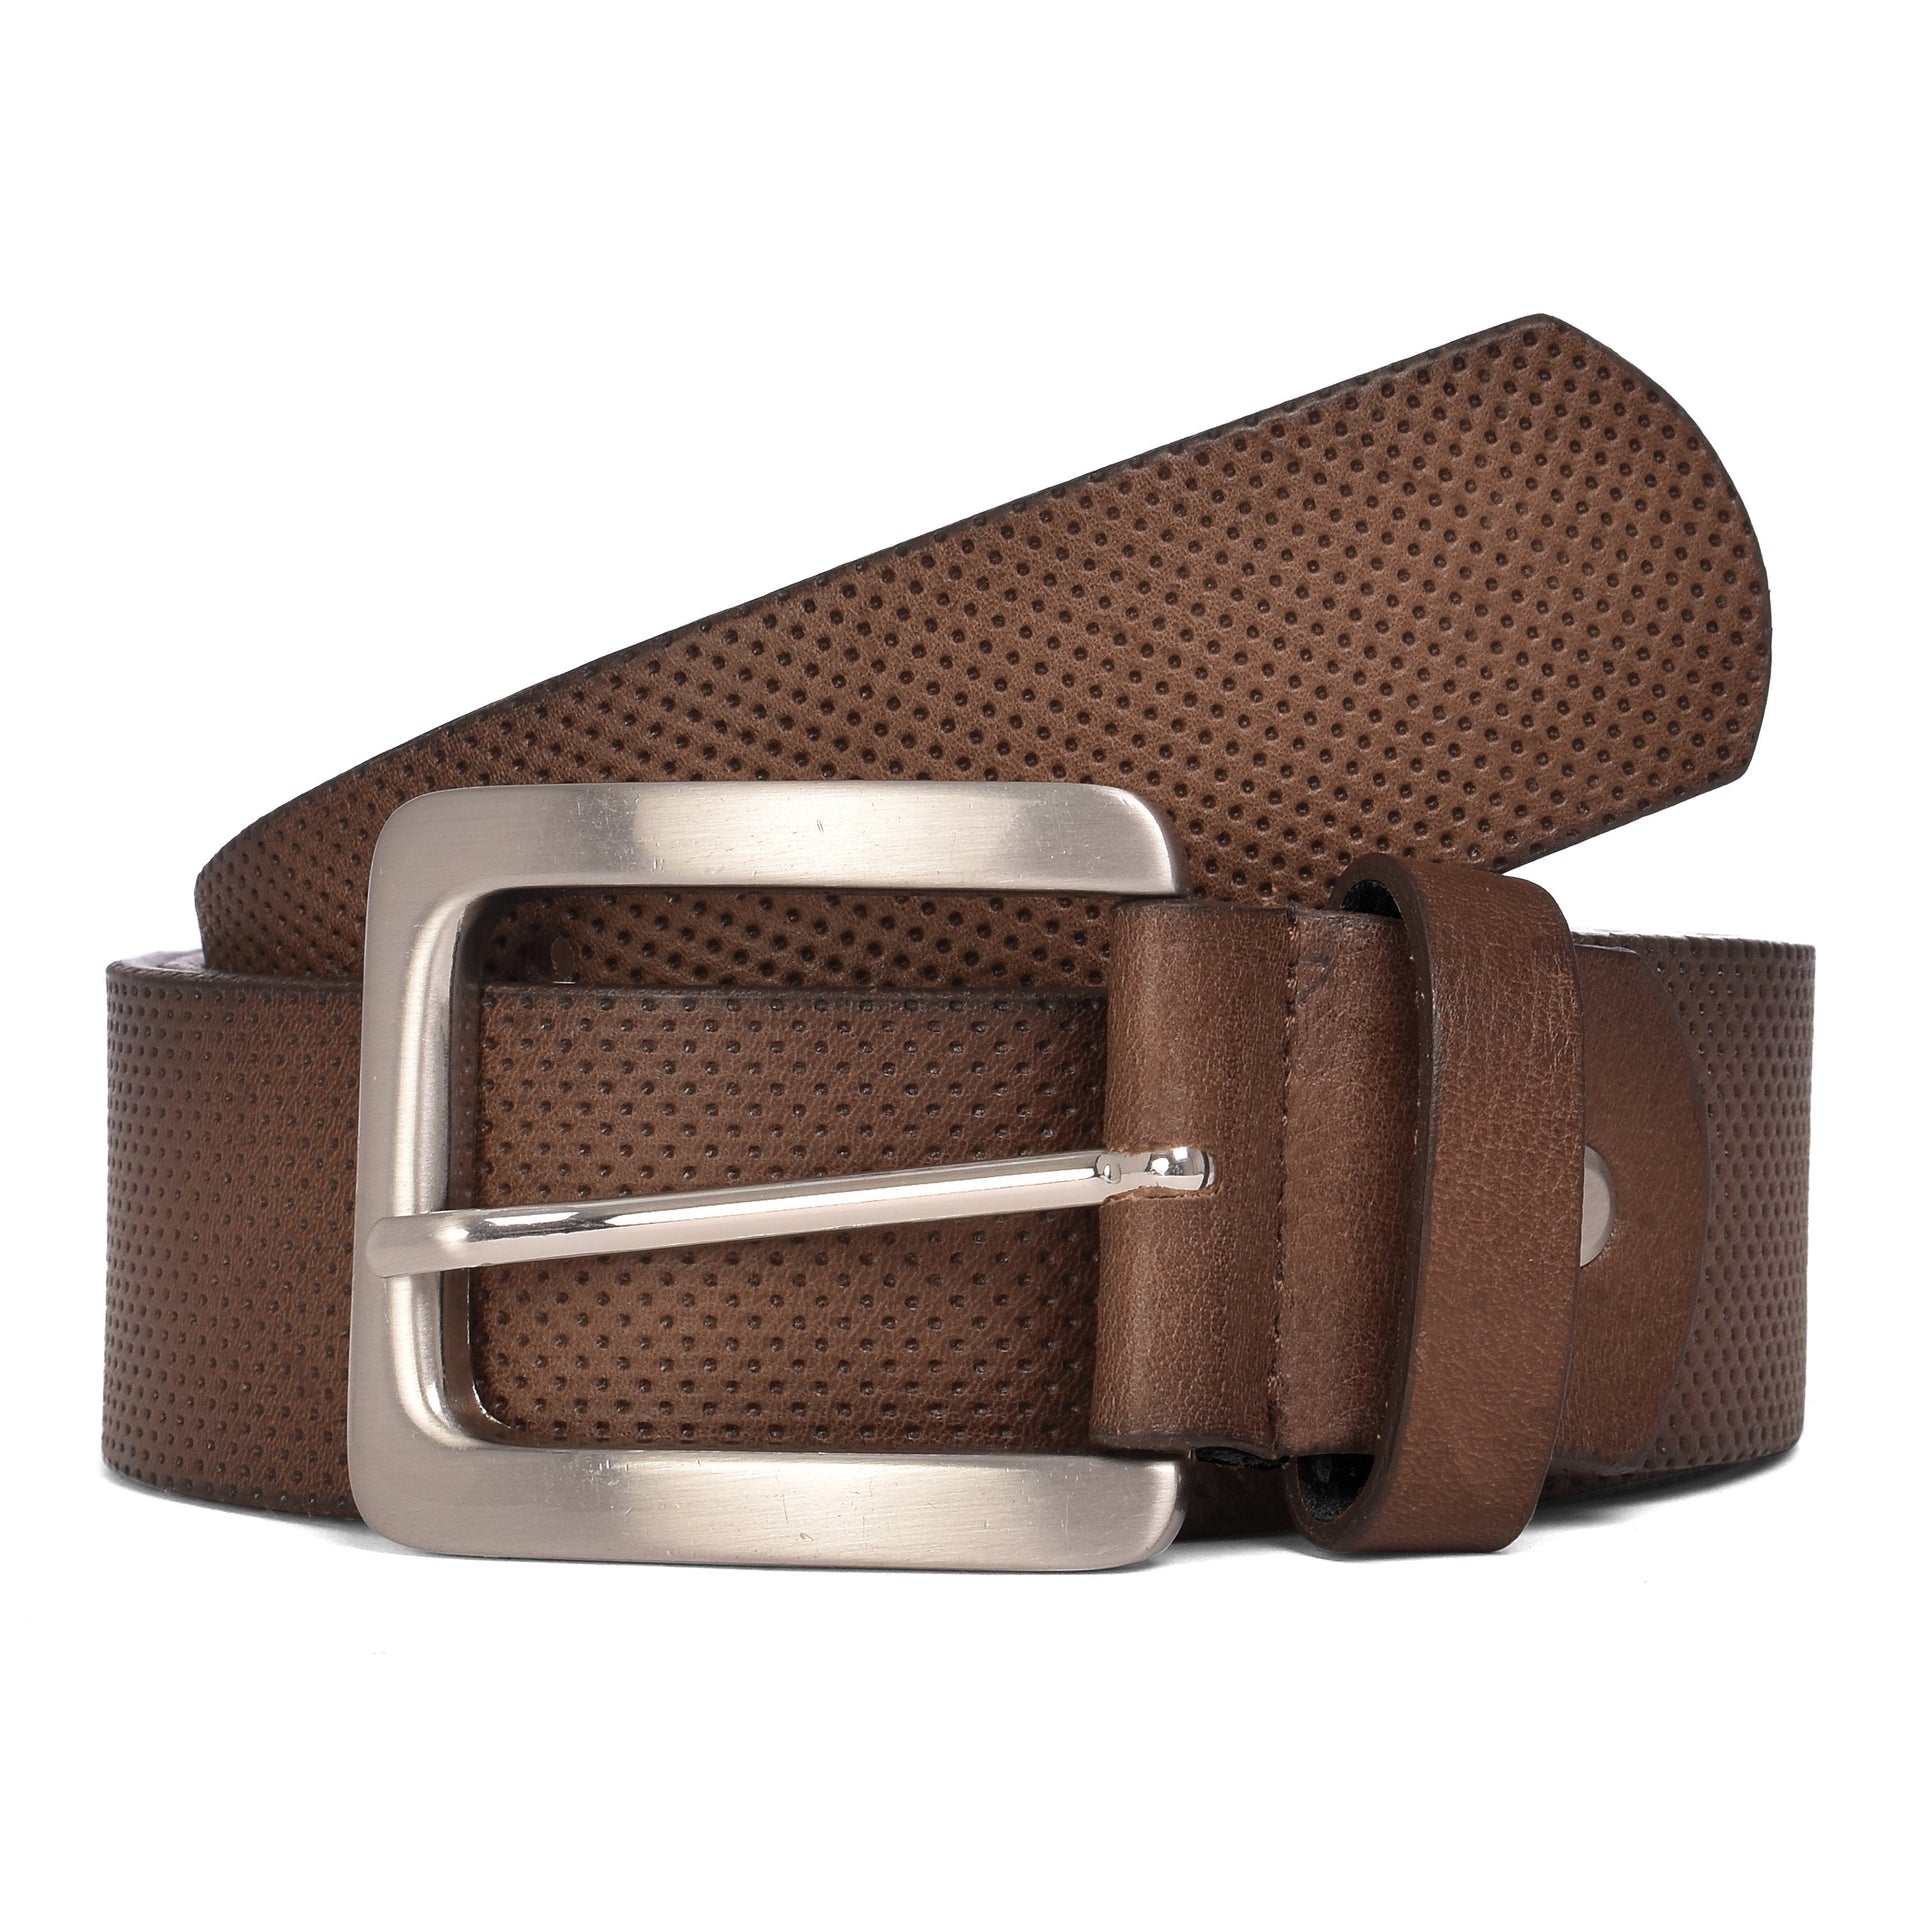 Perforated Casual Belt - Mocca / 30 inch - 75 cm - Belts